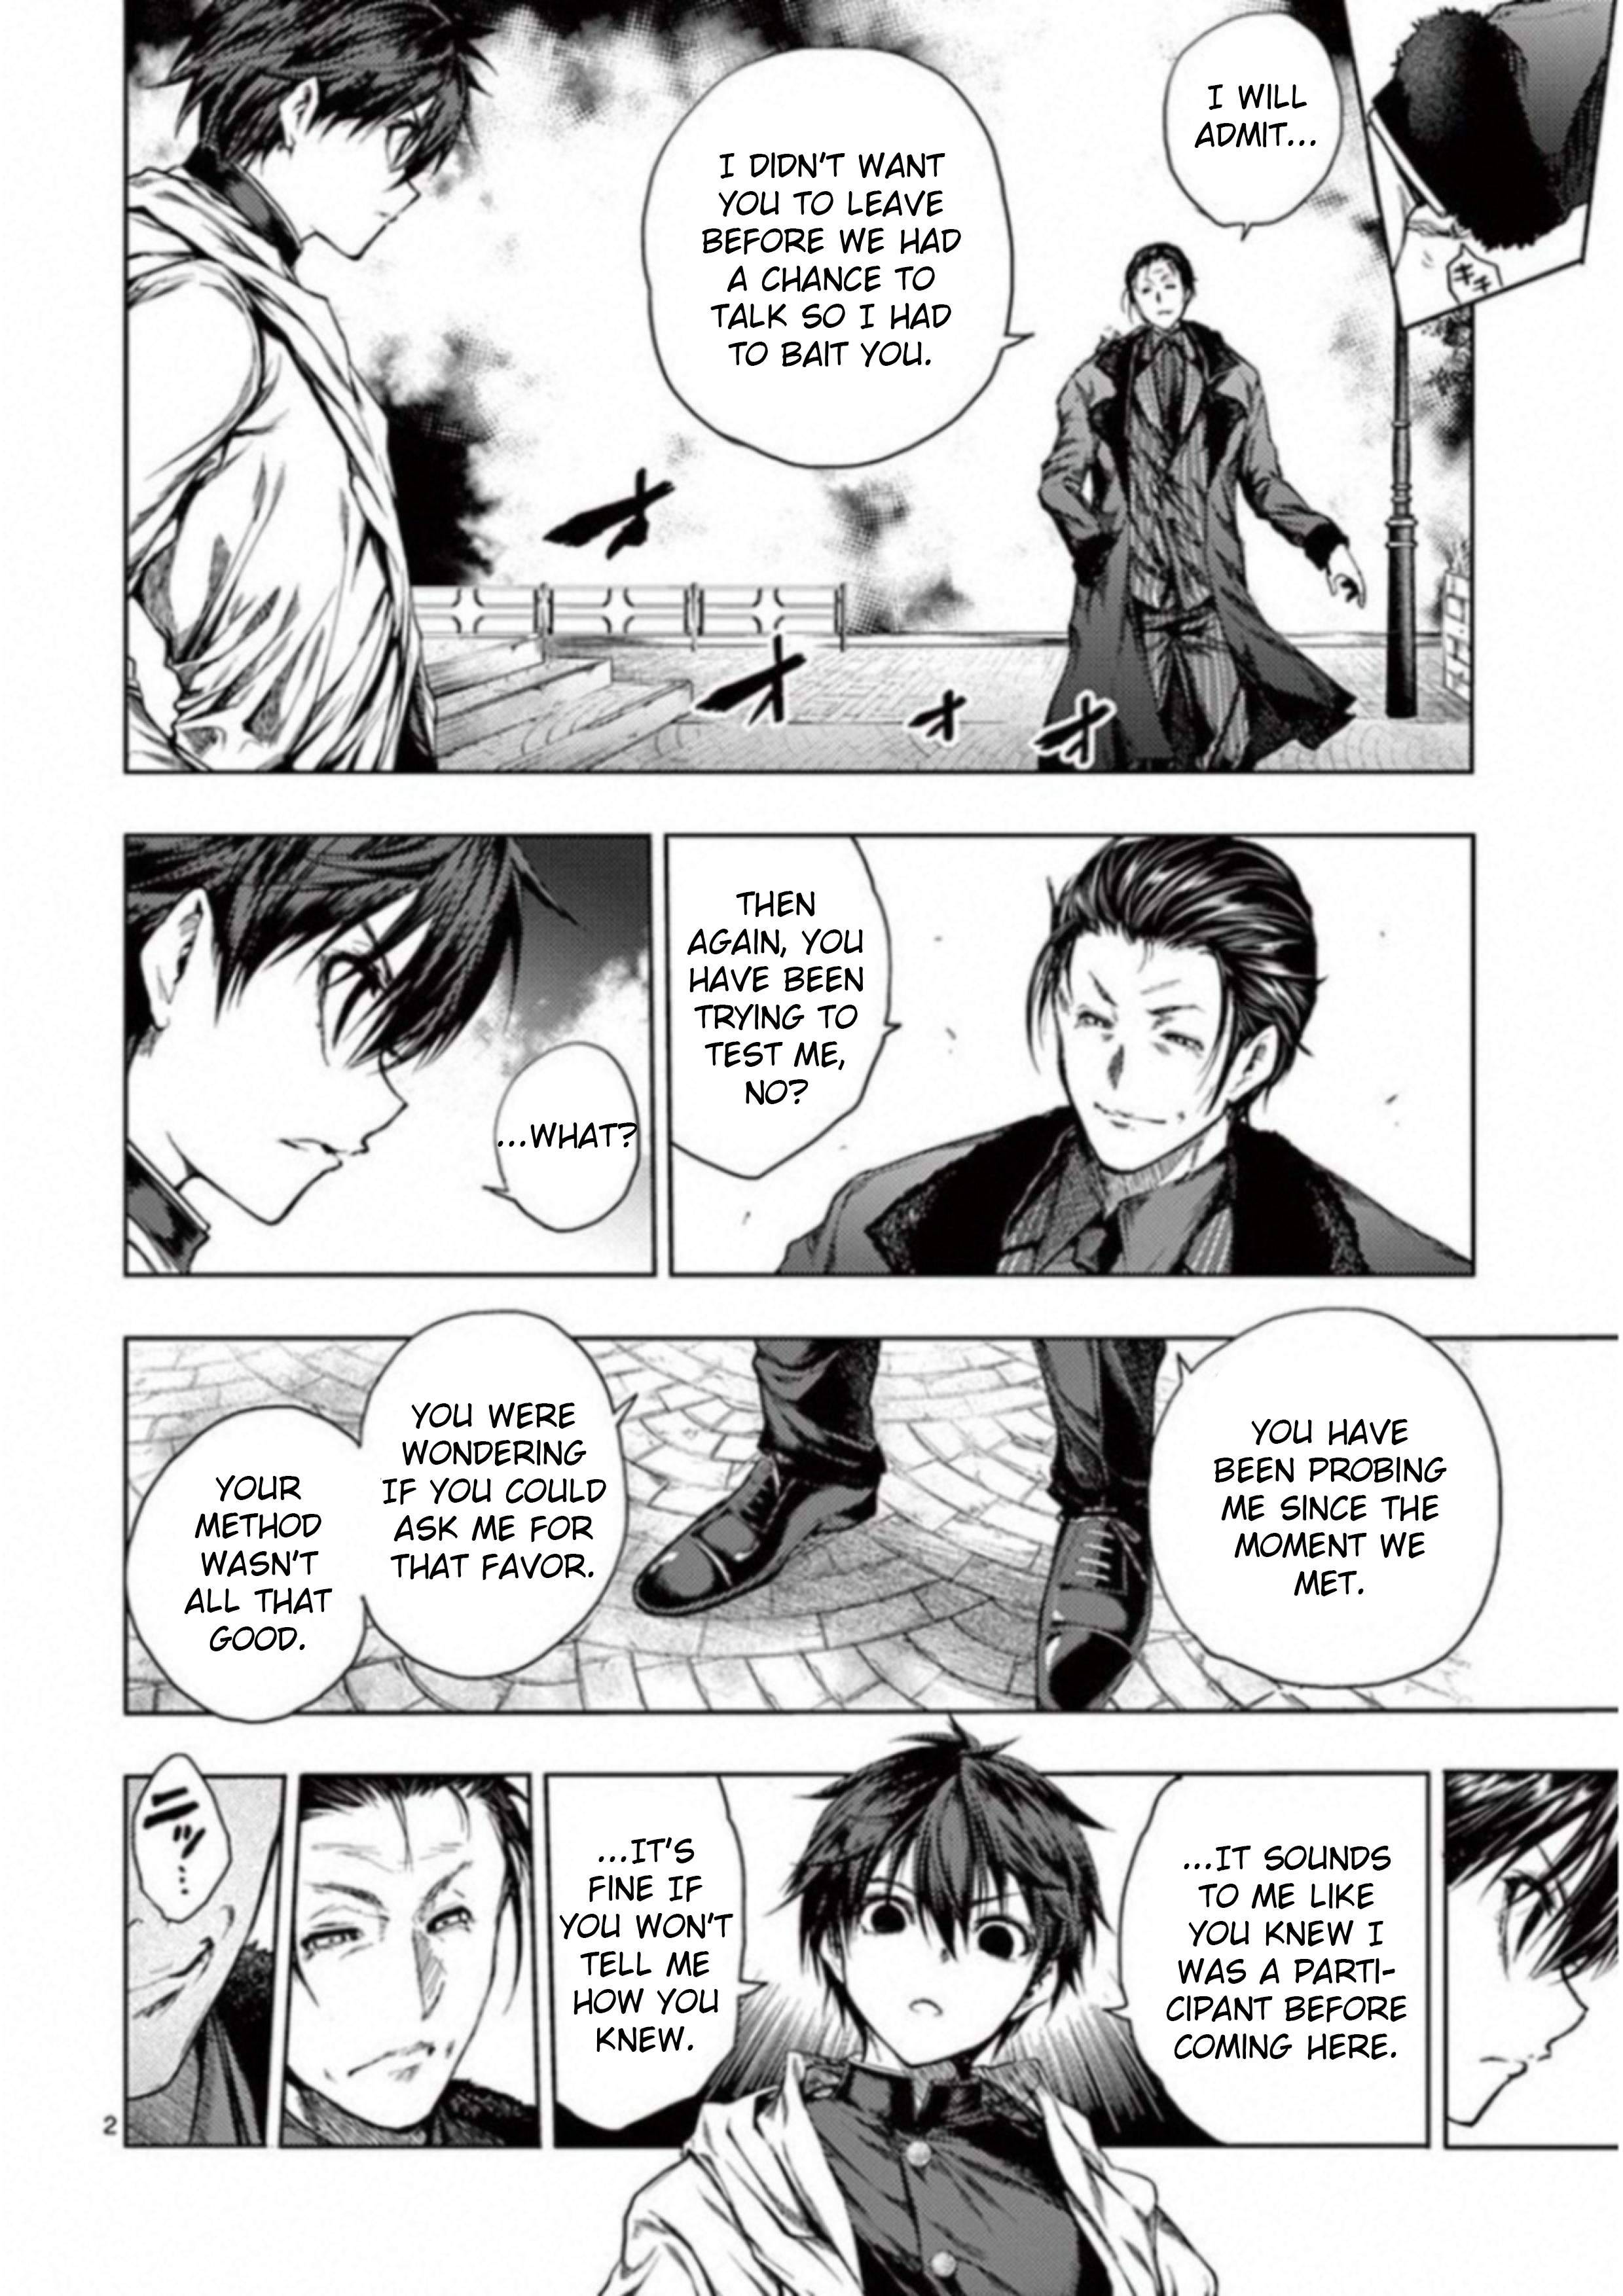 Start Fighting 5 Seconds After Meeting - chapter 82 - #3